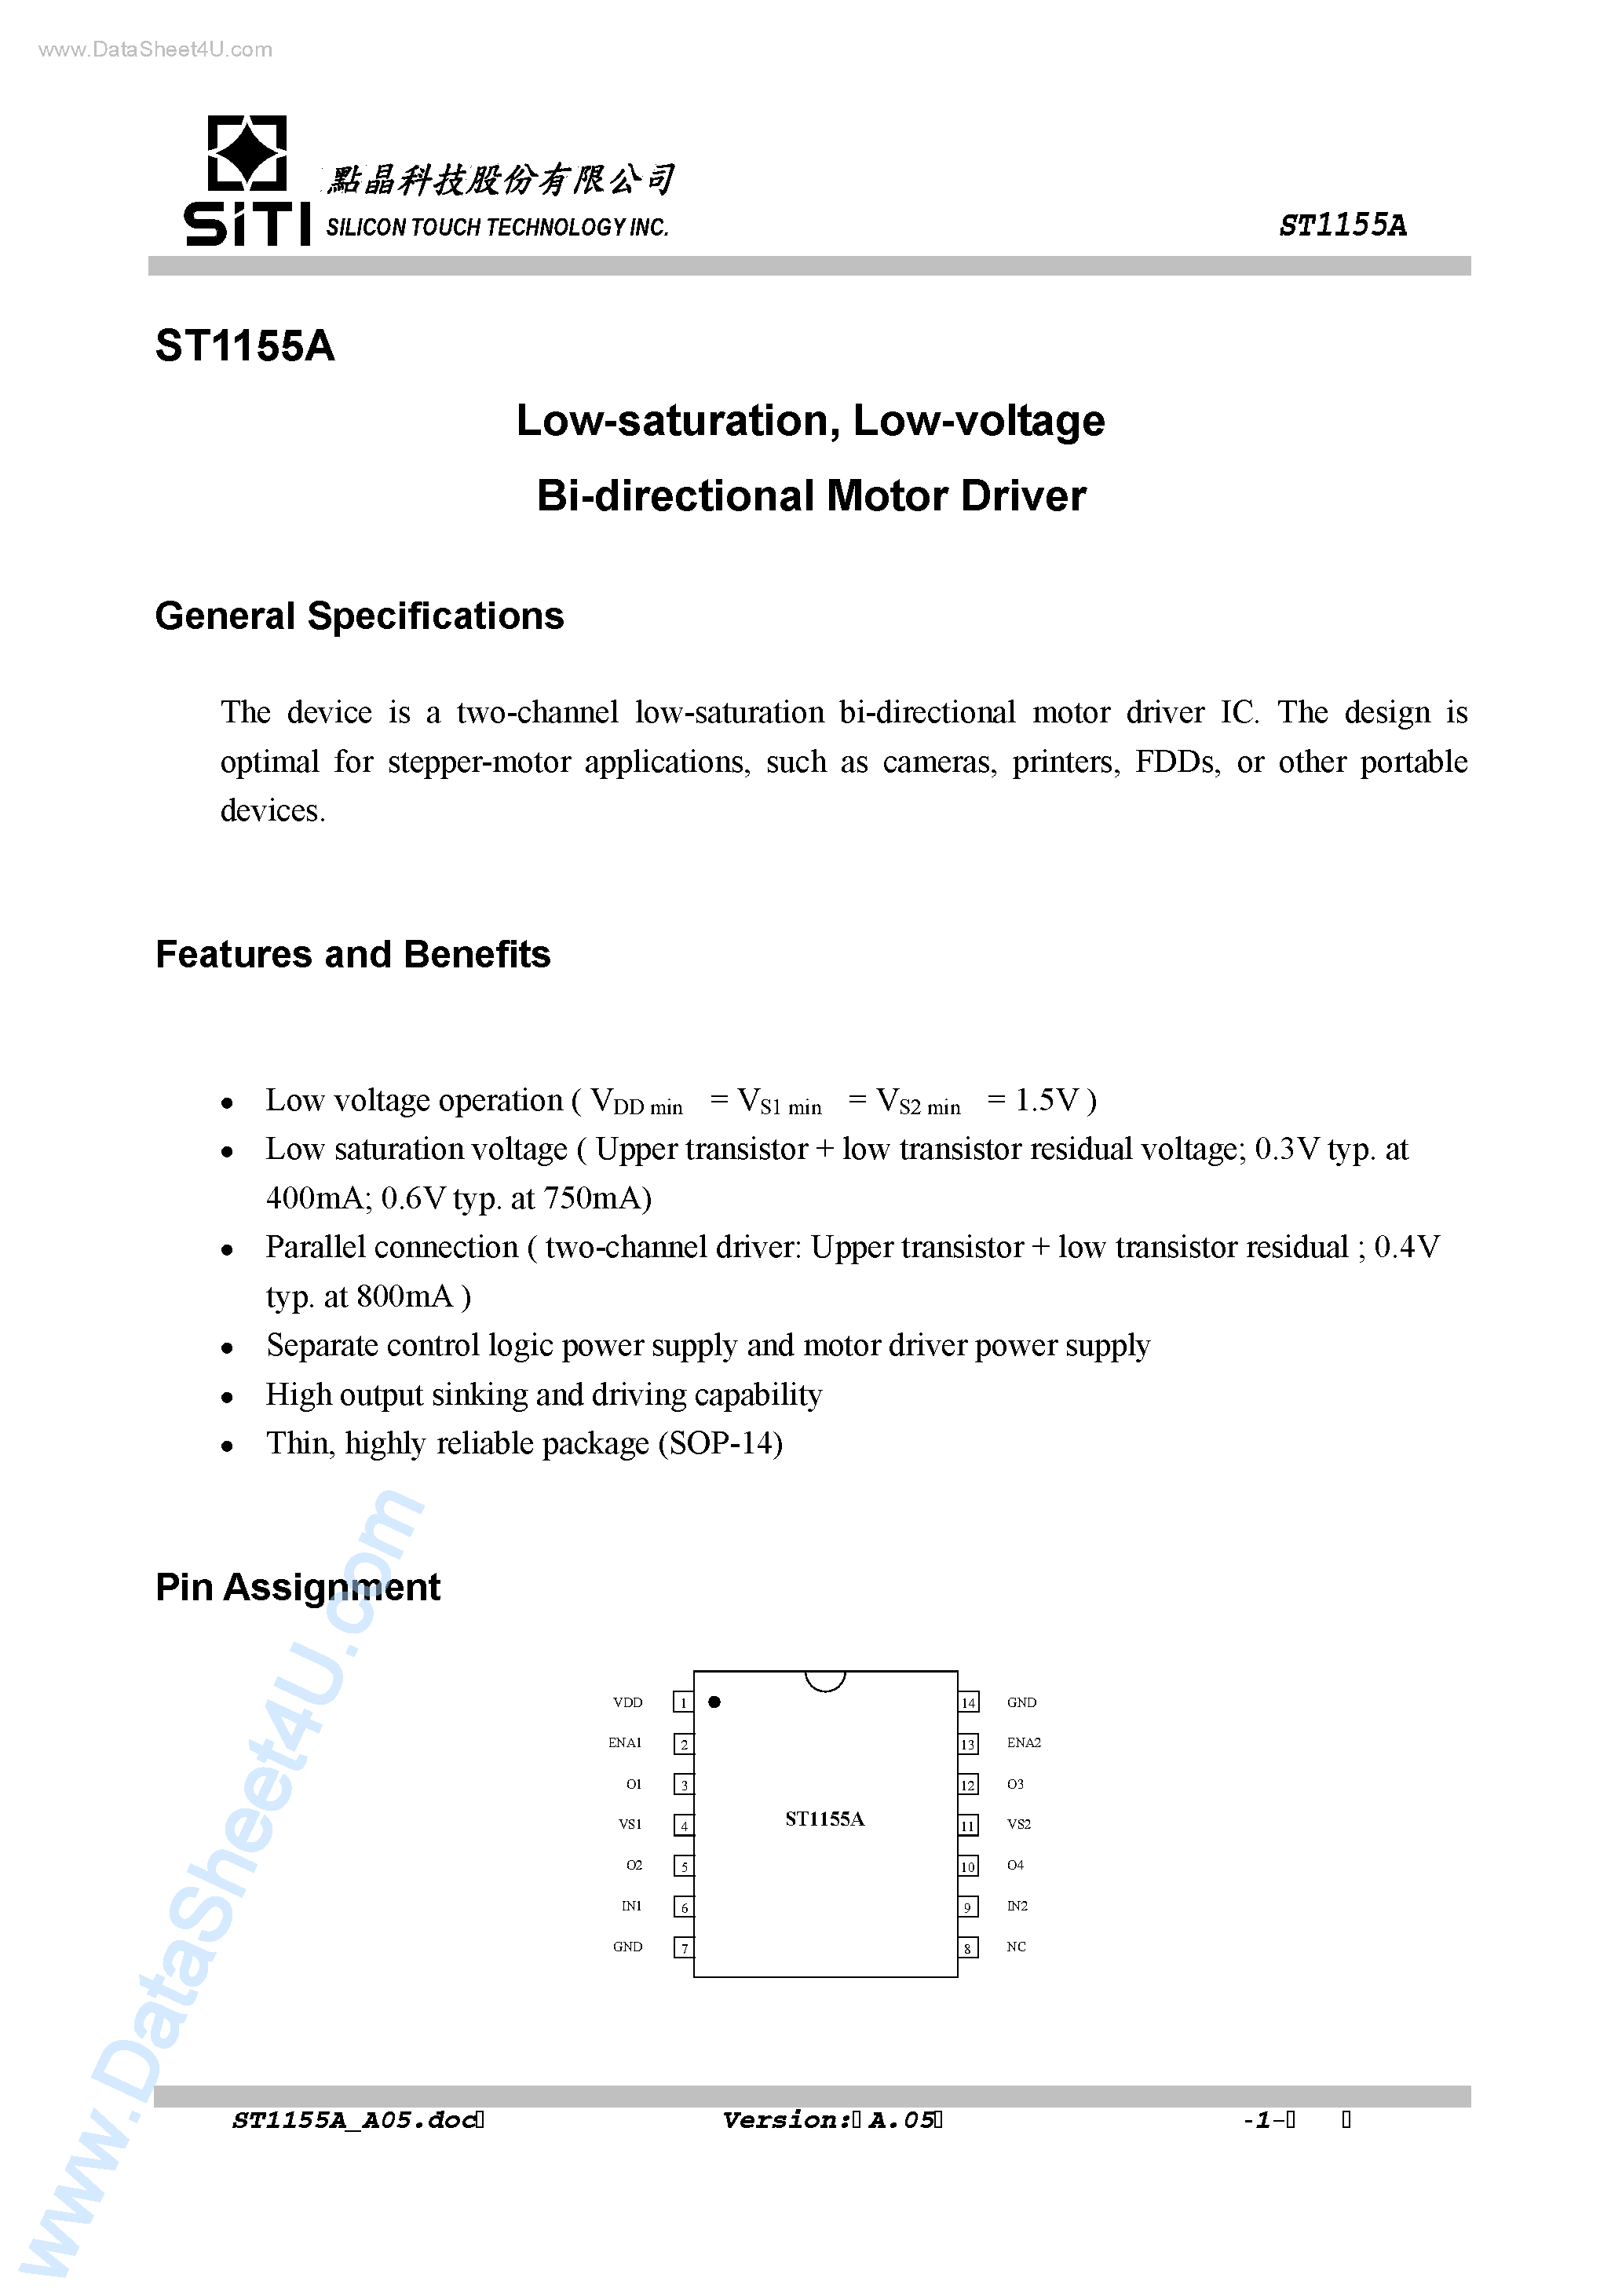 Datasheet ST1155A - Low-voltage bi-directional Motor Driver page 2